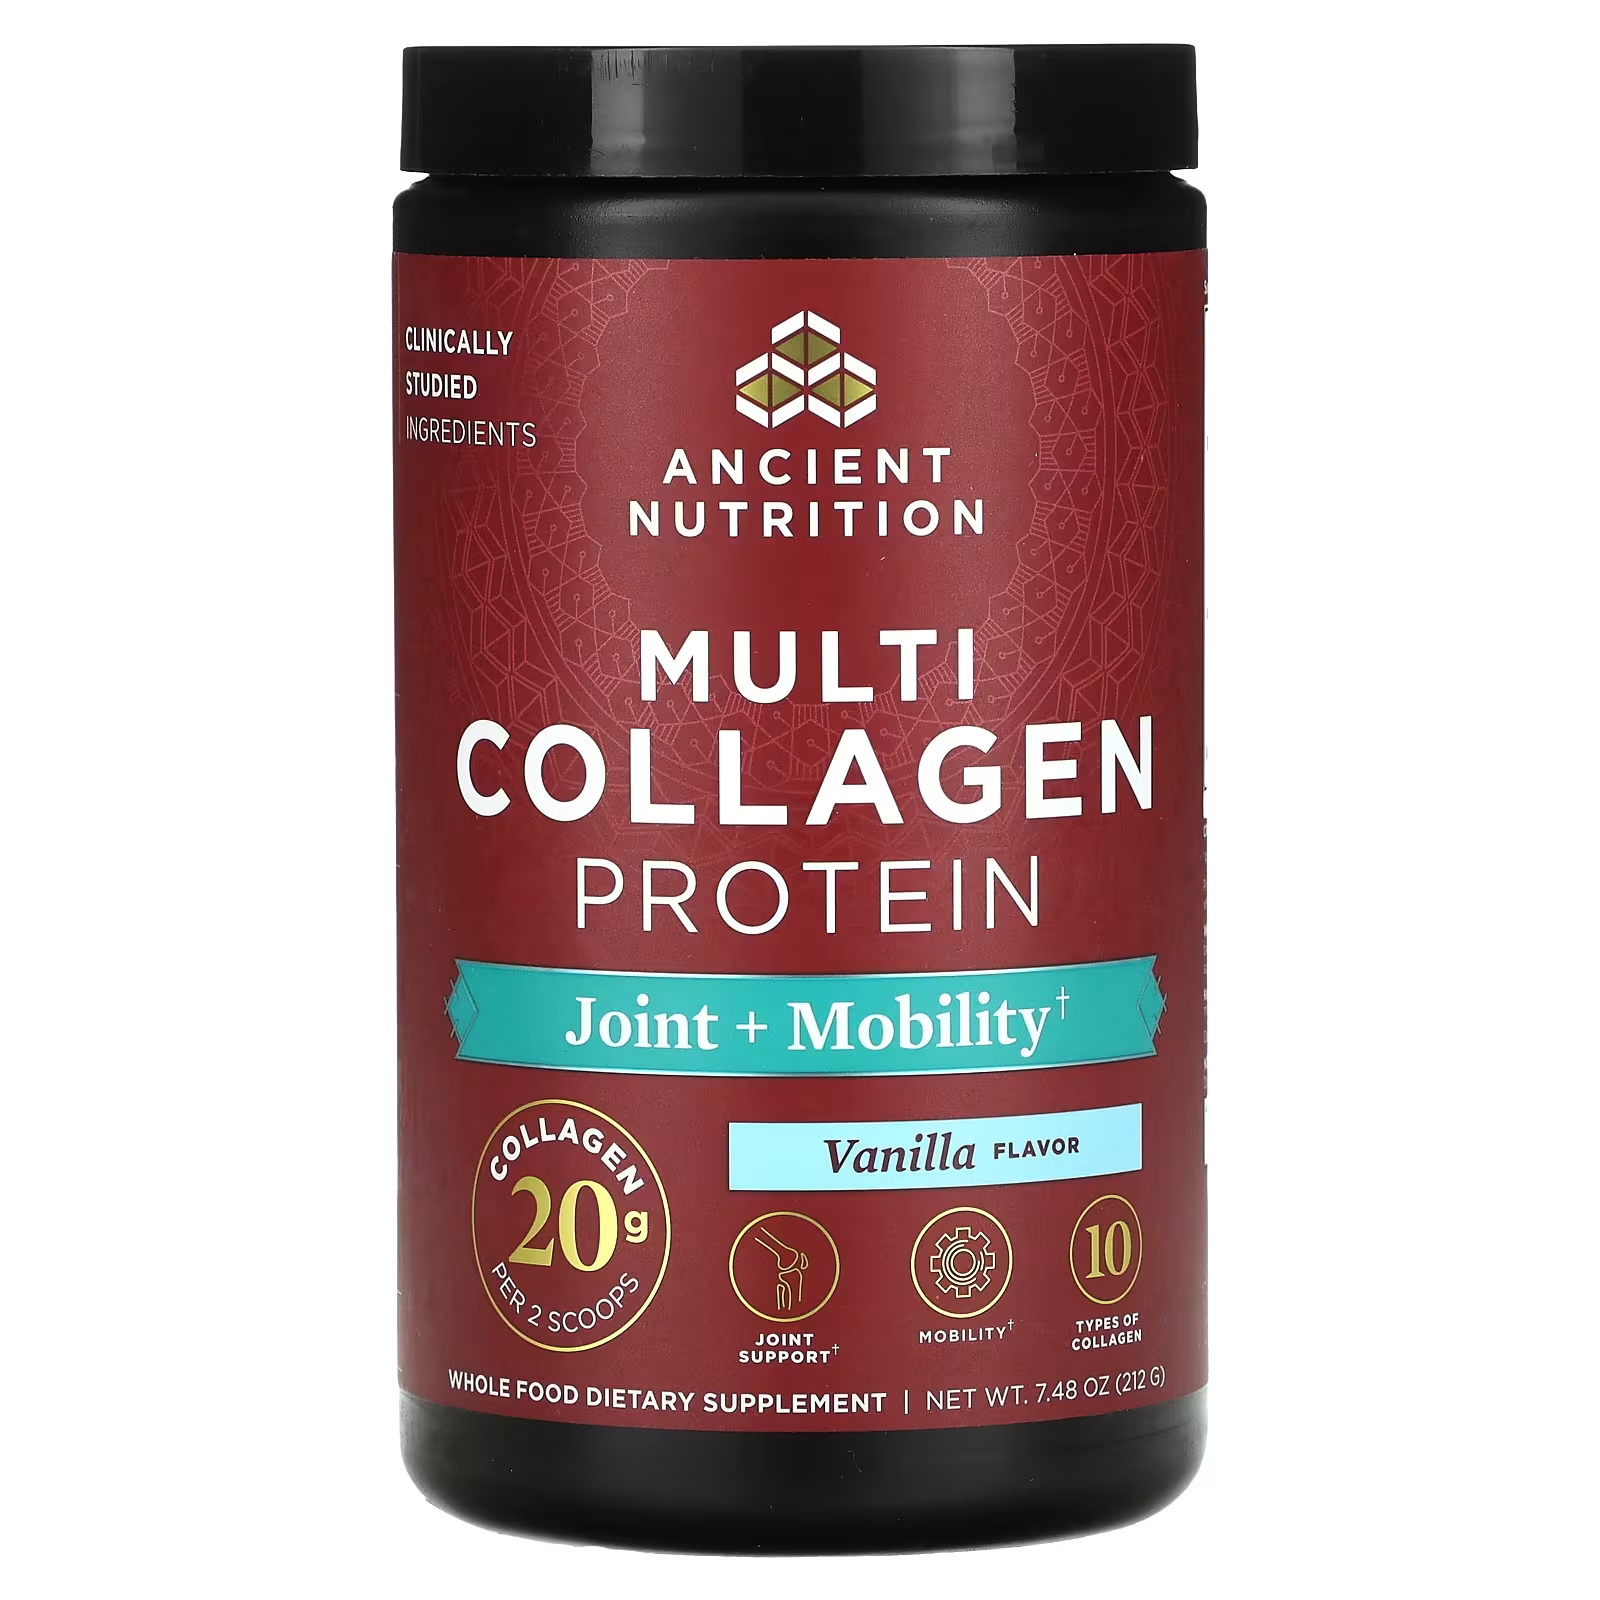 Пищевая добавка Ancient Nutrition Multi Collagen Protein Joint + Mobility Vanilla, 212 г пищевая добавка ancient nutrition multi collagen protein клубничный лимонад 273 6 г